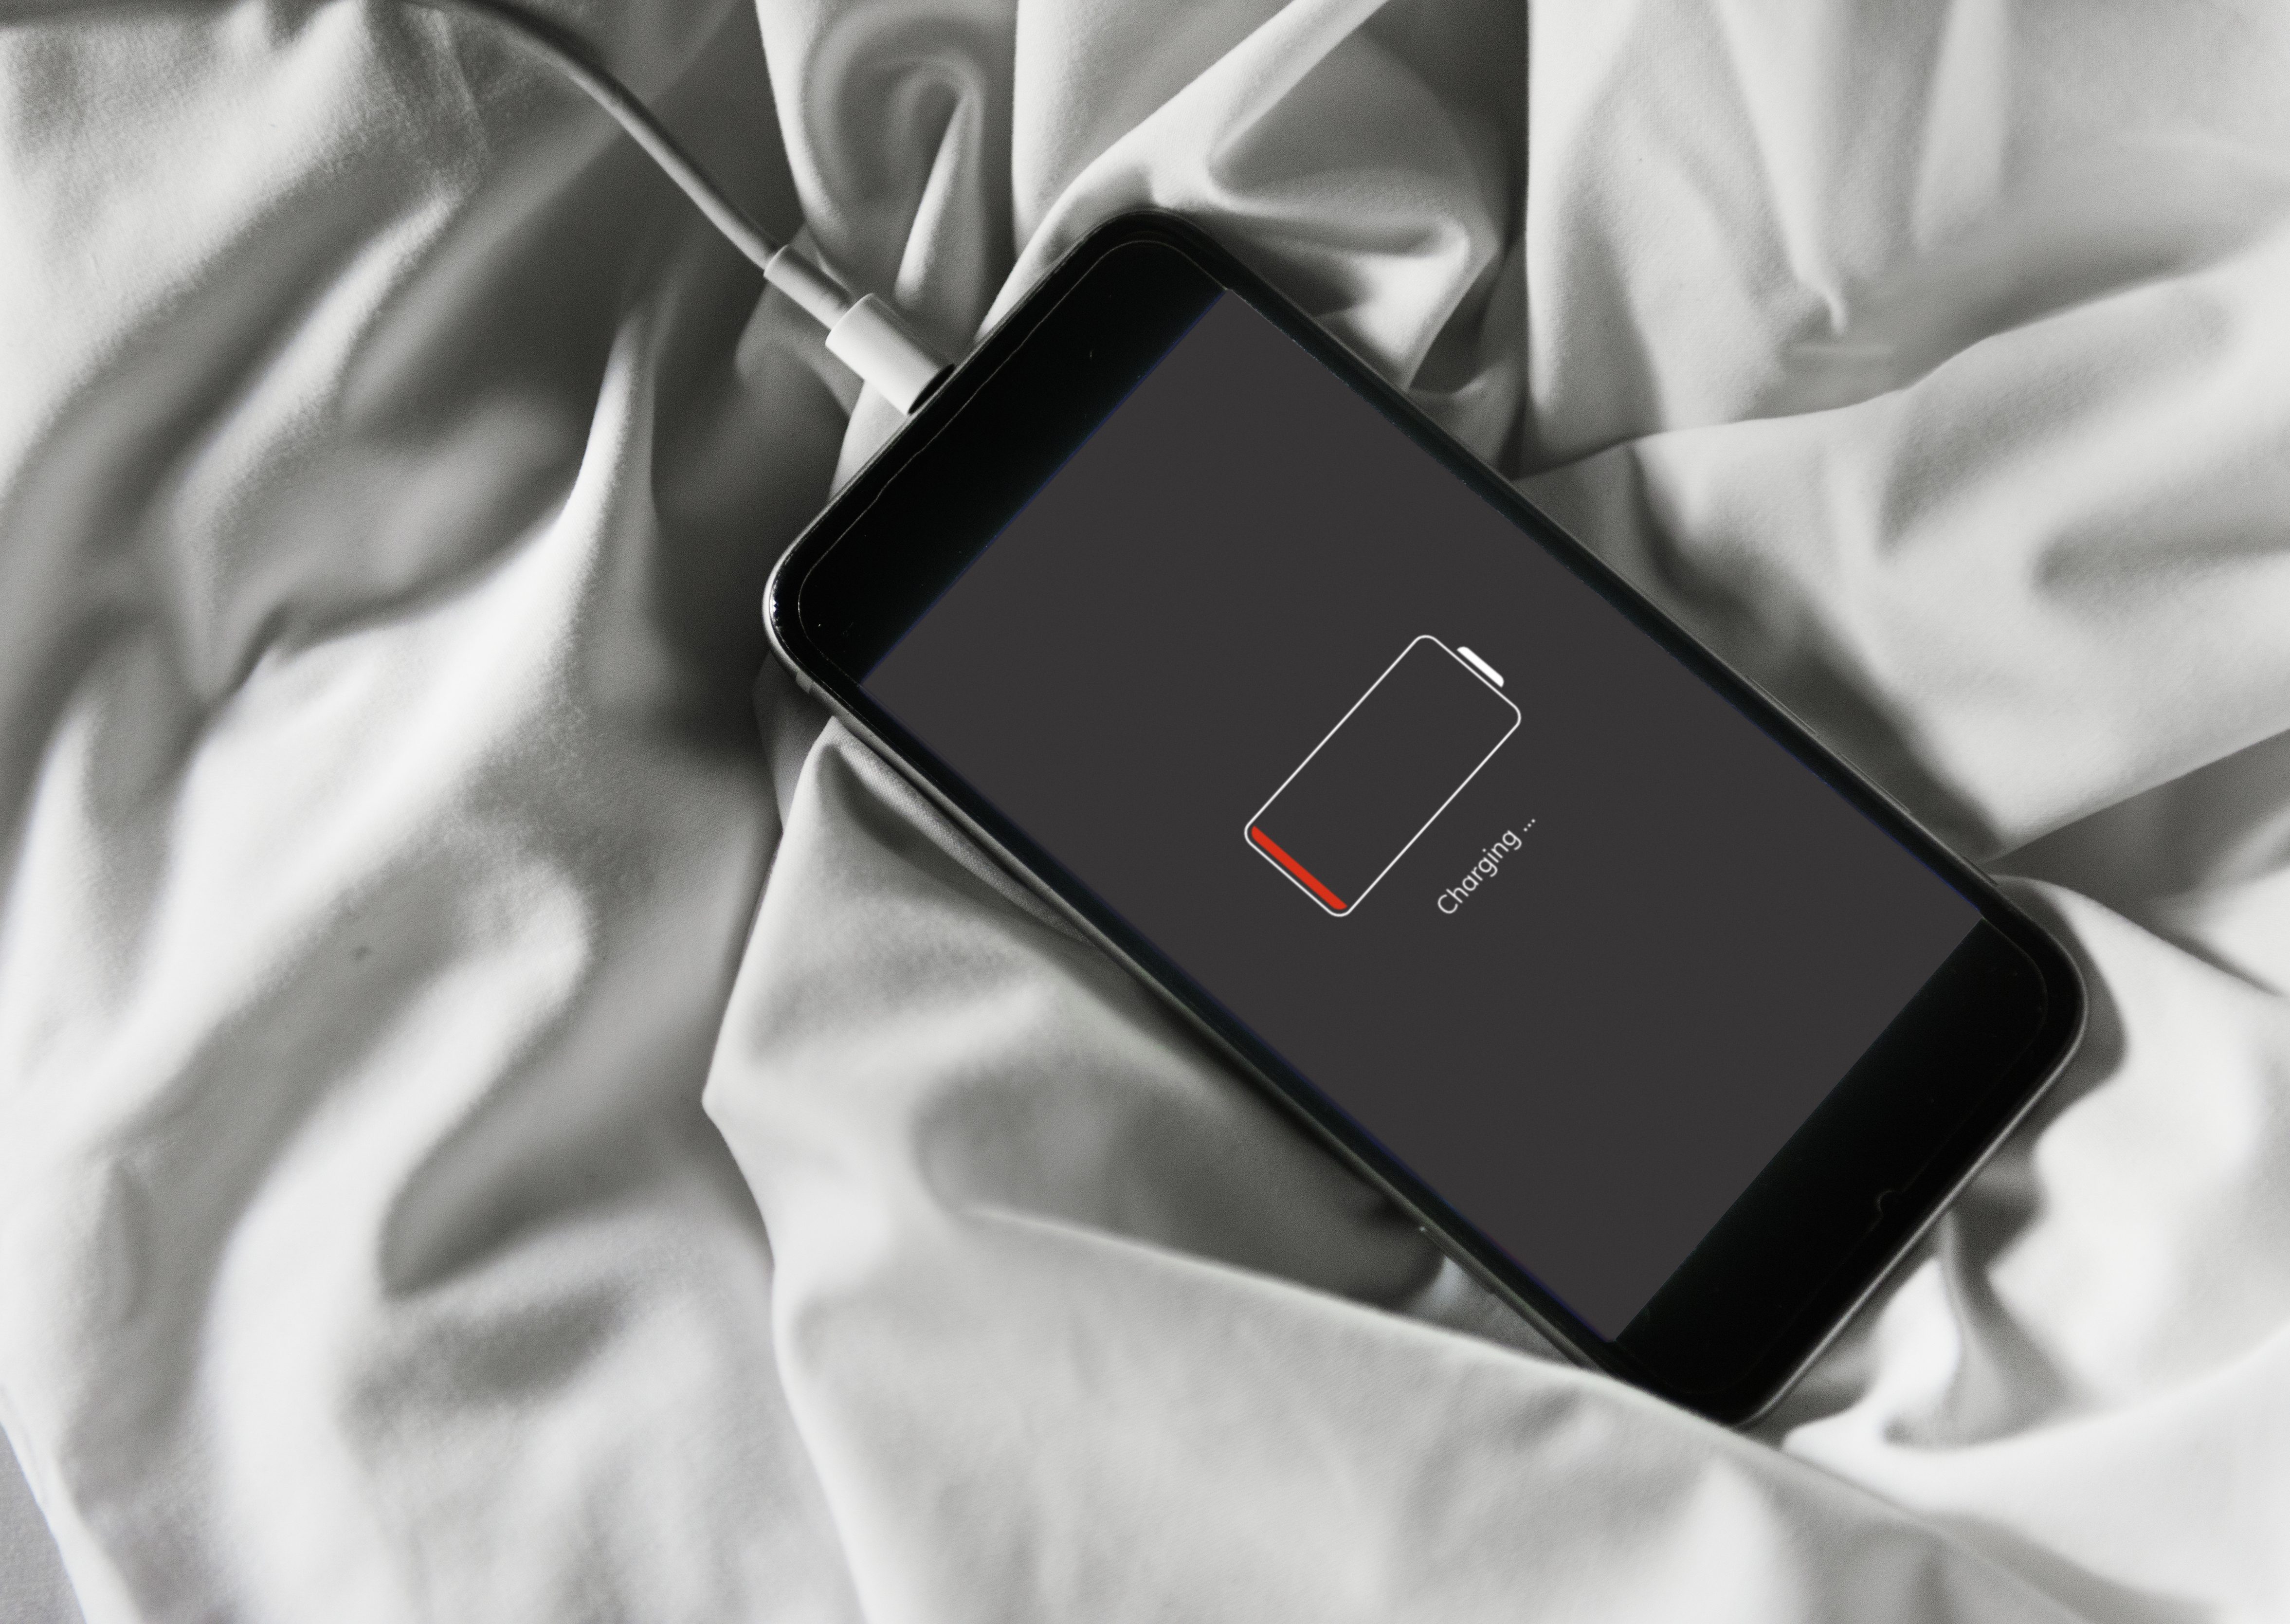 The Reason You Should Think Twice Before Charging Your Phone in Bed